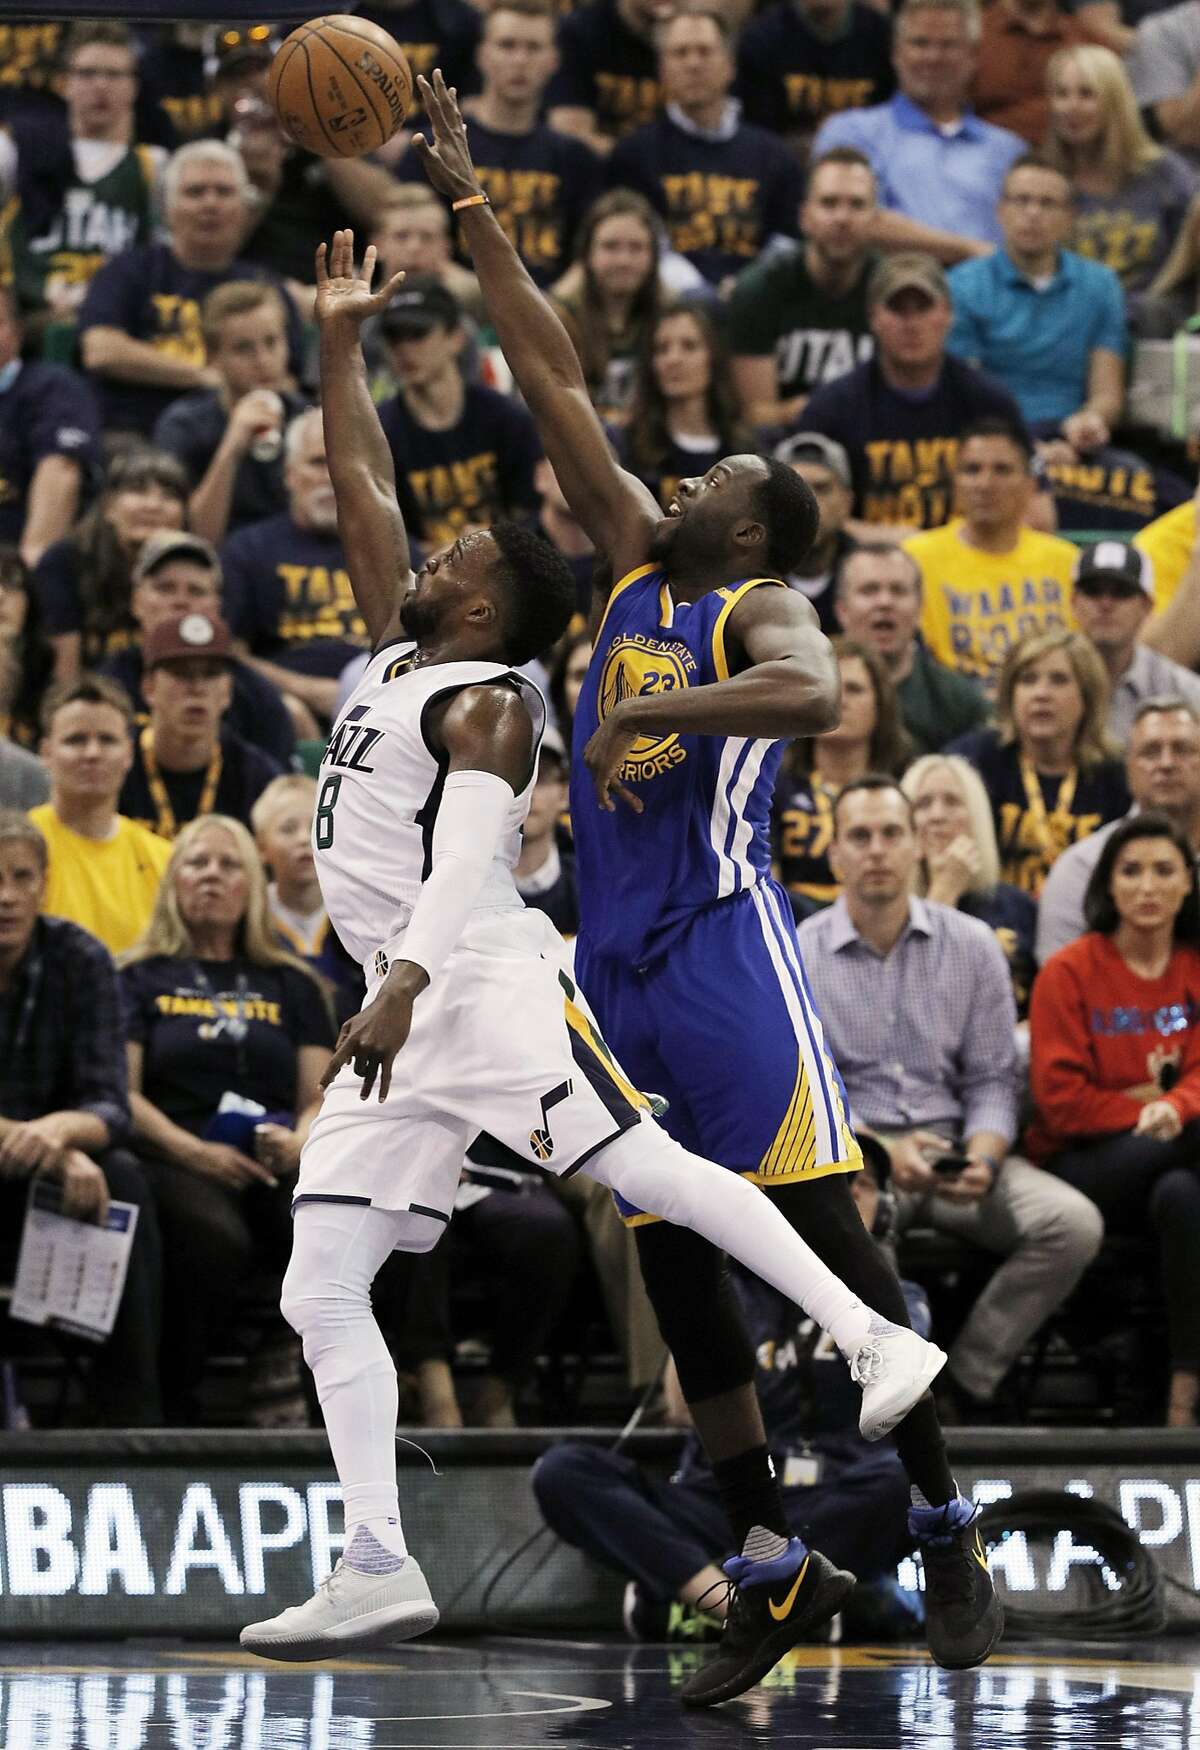 Draymond Green (23) defends against Shelvin Mack (8) in the first half as the Golden State Warriors played the Utah Jazz at Vivint Smart Home Arena in Salt Lake City, Utah, on Monday, May 8, 2017, in Game 4 of the 2017 Western Conference Semifinals. The